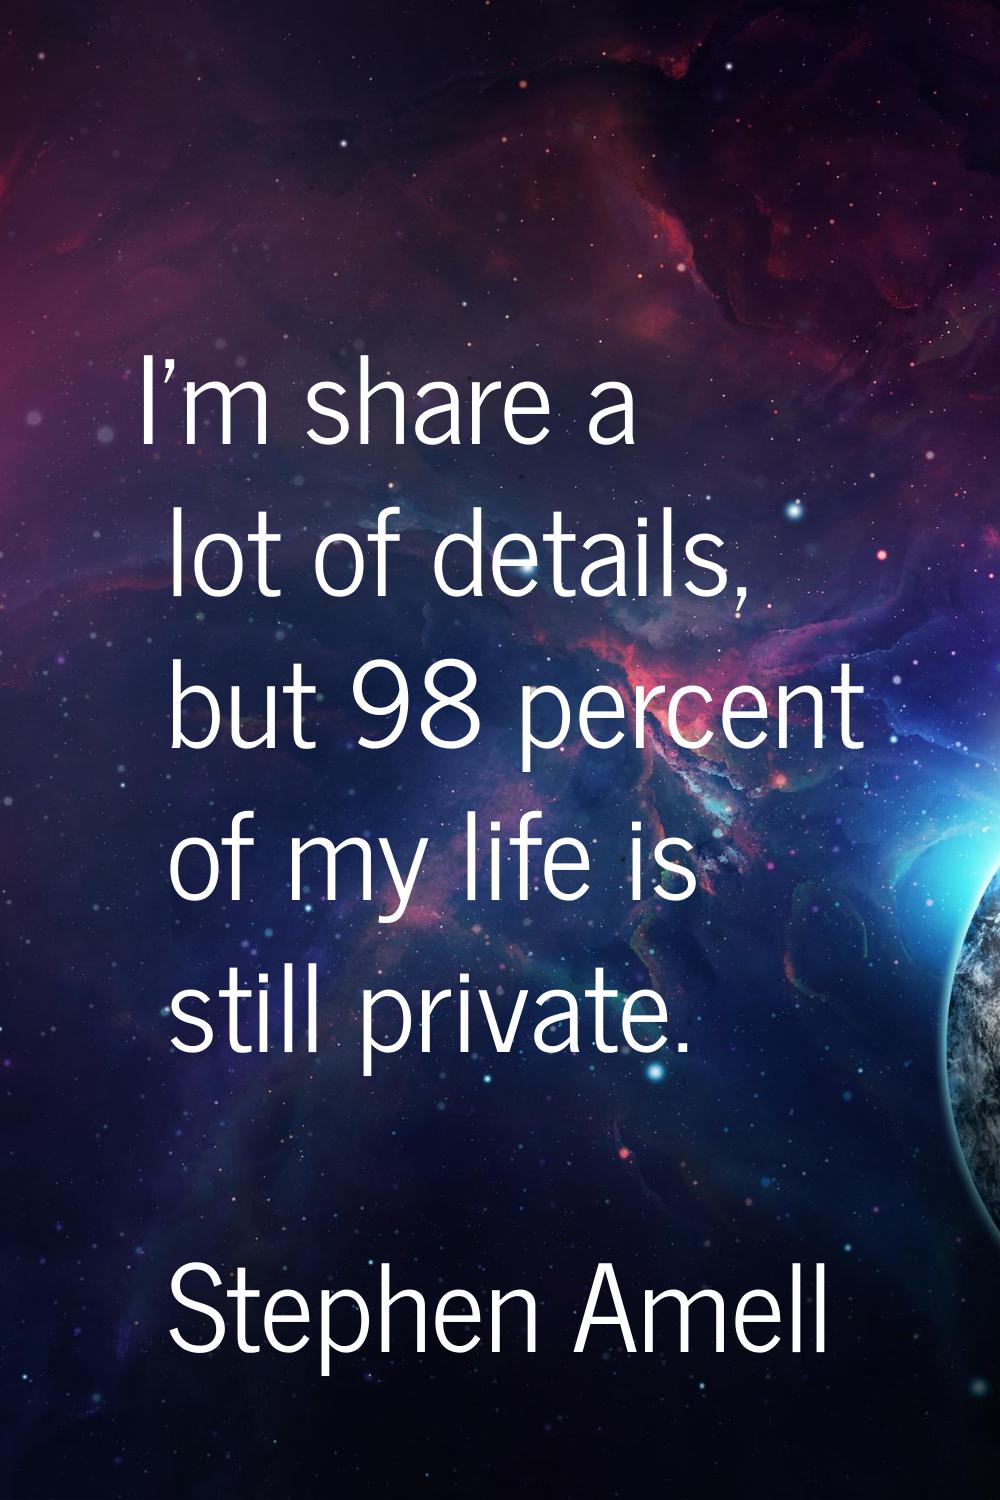 I'm share a lot of details, but 98 percent of my life is still private.